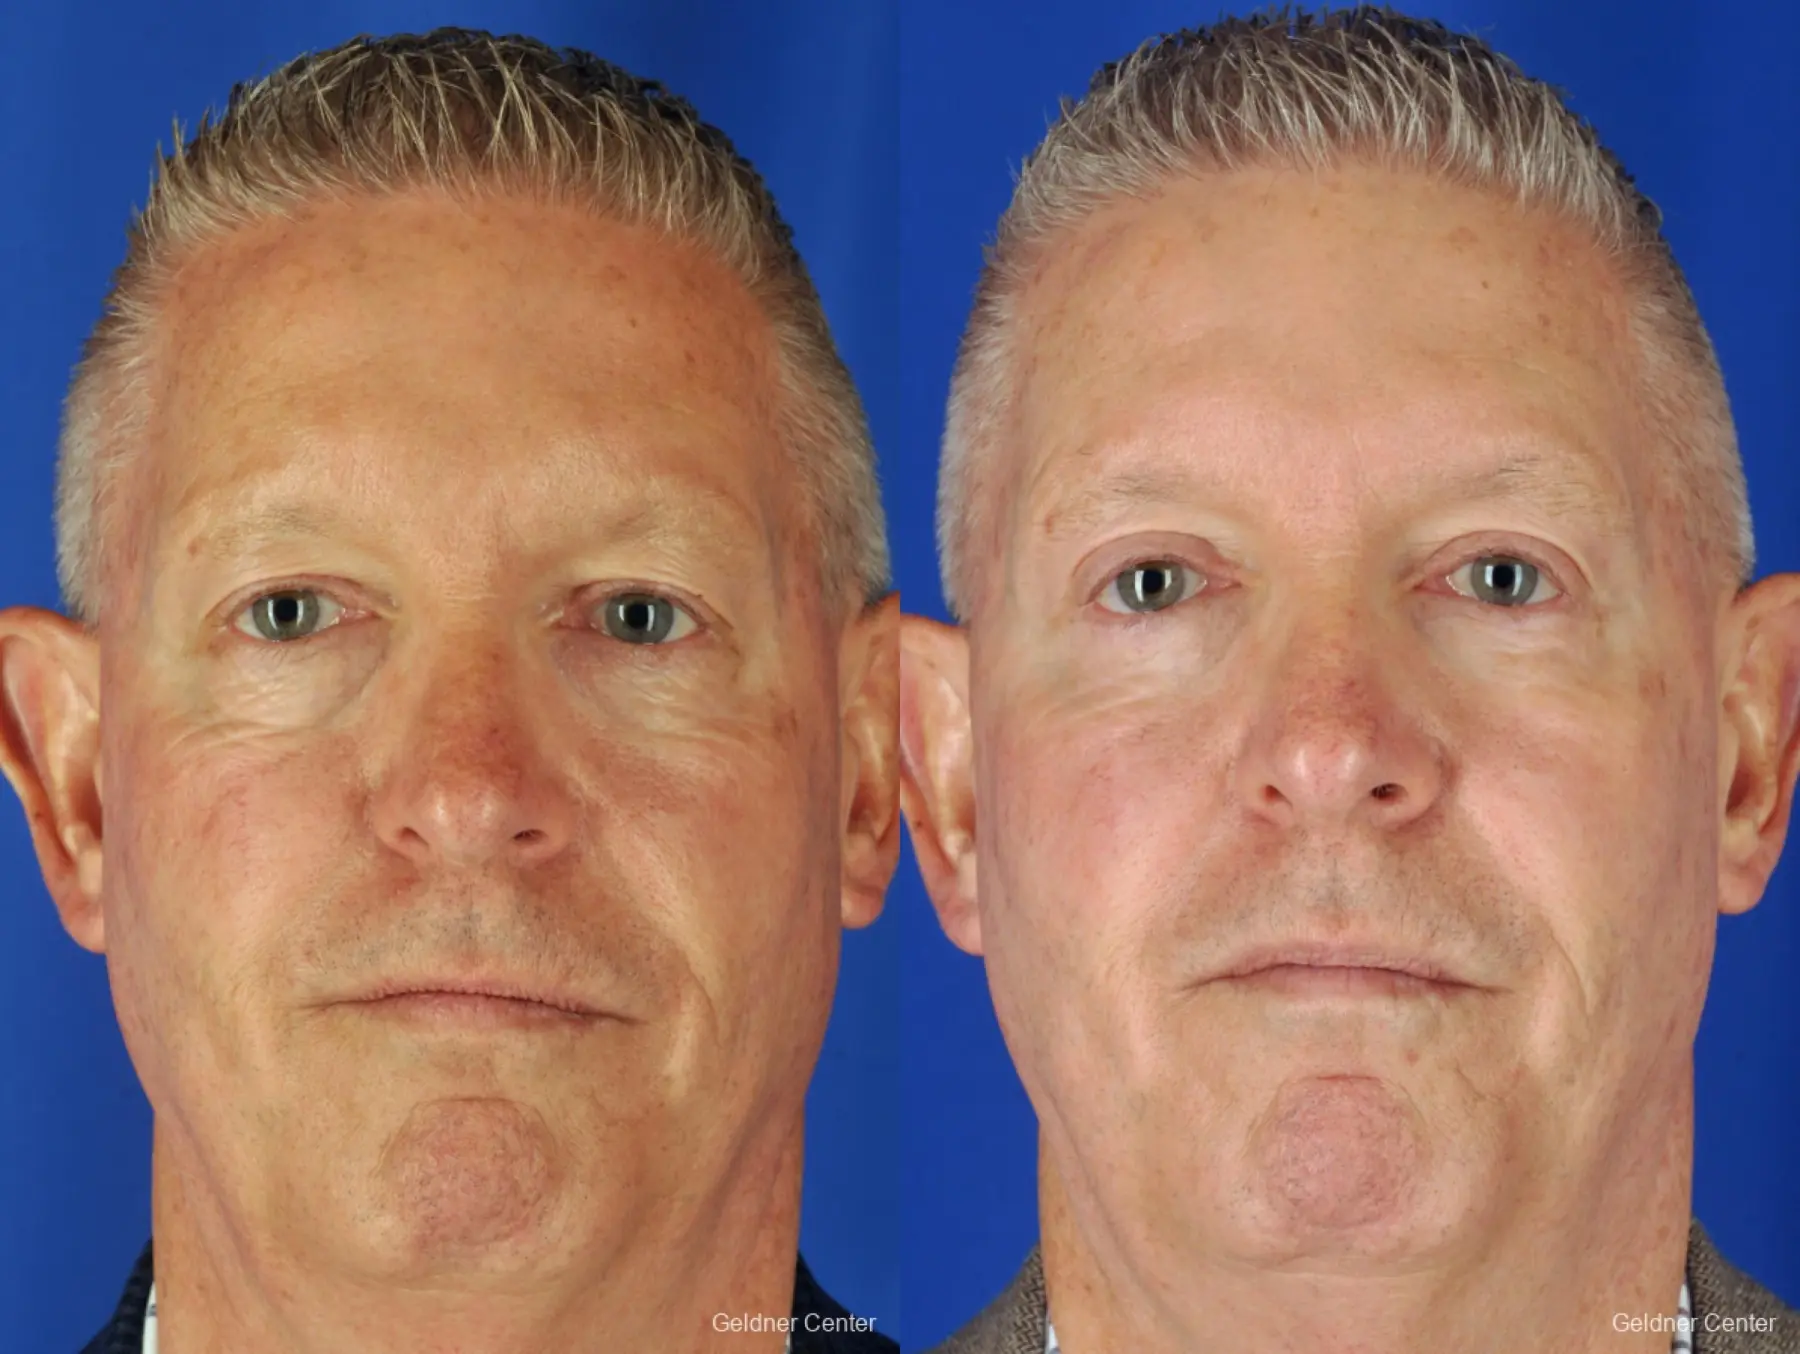 Eyelid Lift For Men: Patient 1 - Before and After 3